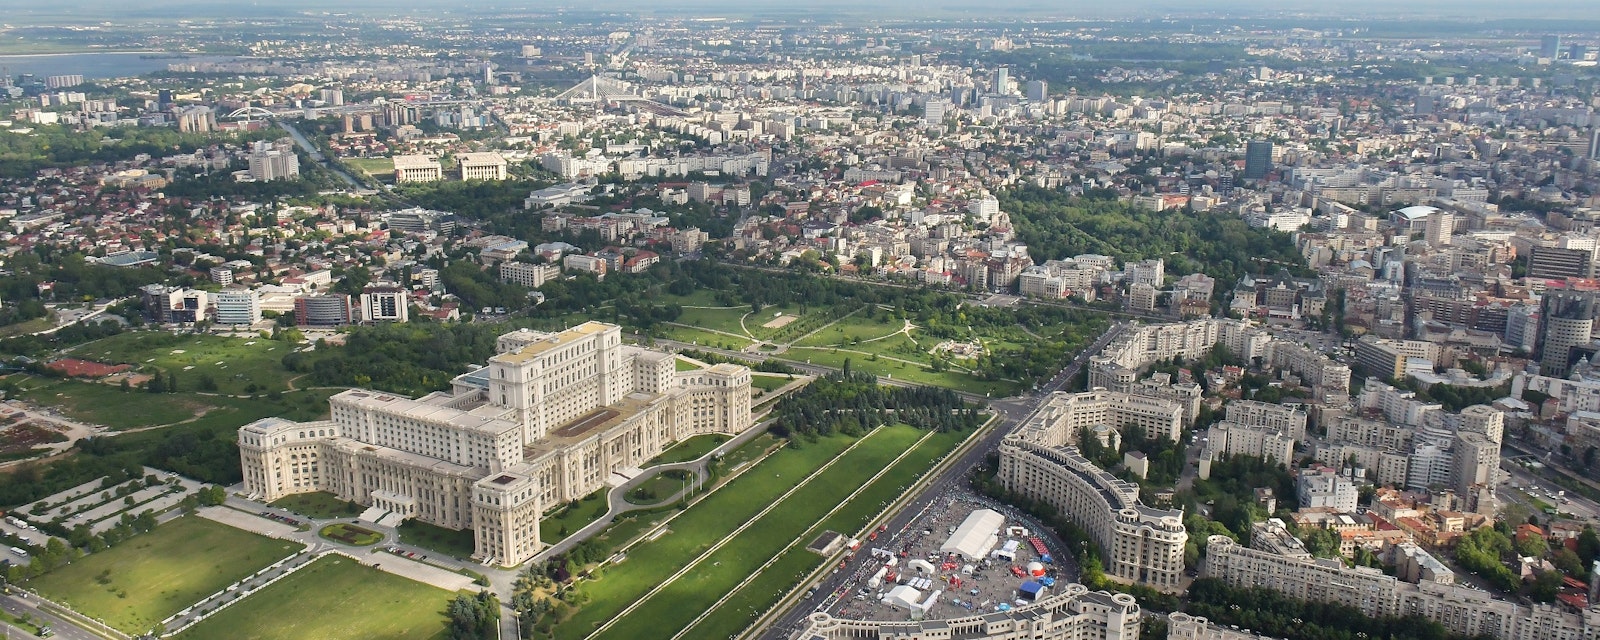 Bucharest,,Romania,,May,15,,2016:,Aerial,View,Of,Palace,Of